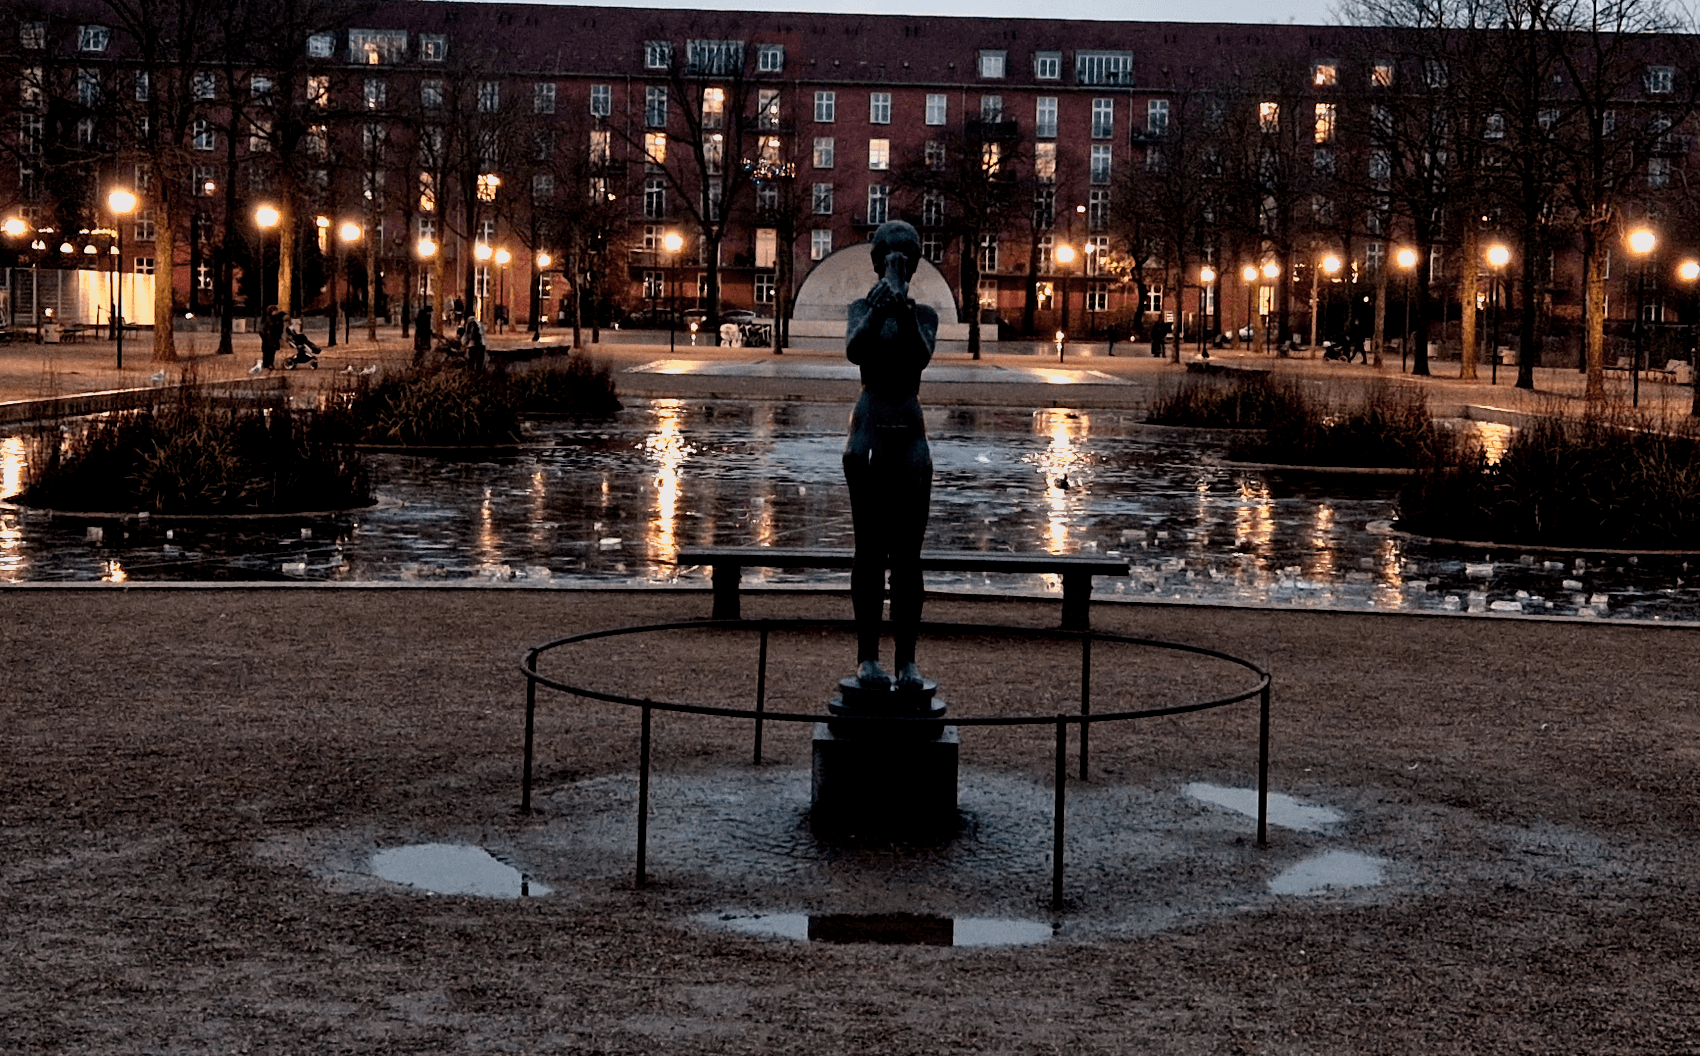 A park. A statue of a woman holding an infant in raised hands, standing in front of a pond in the background is an outdoor stage in front of a residential building.